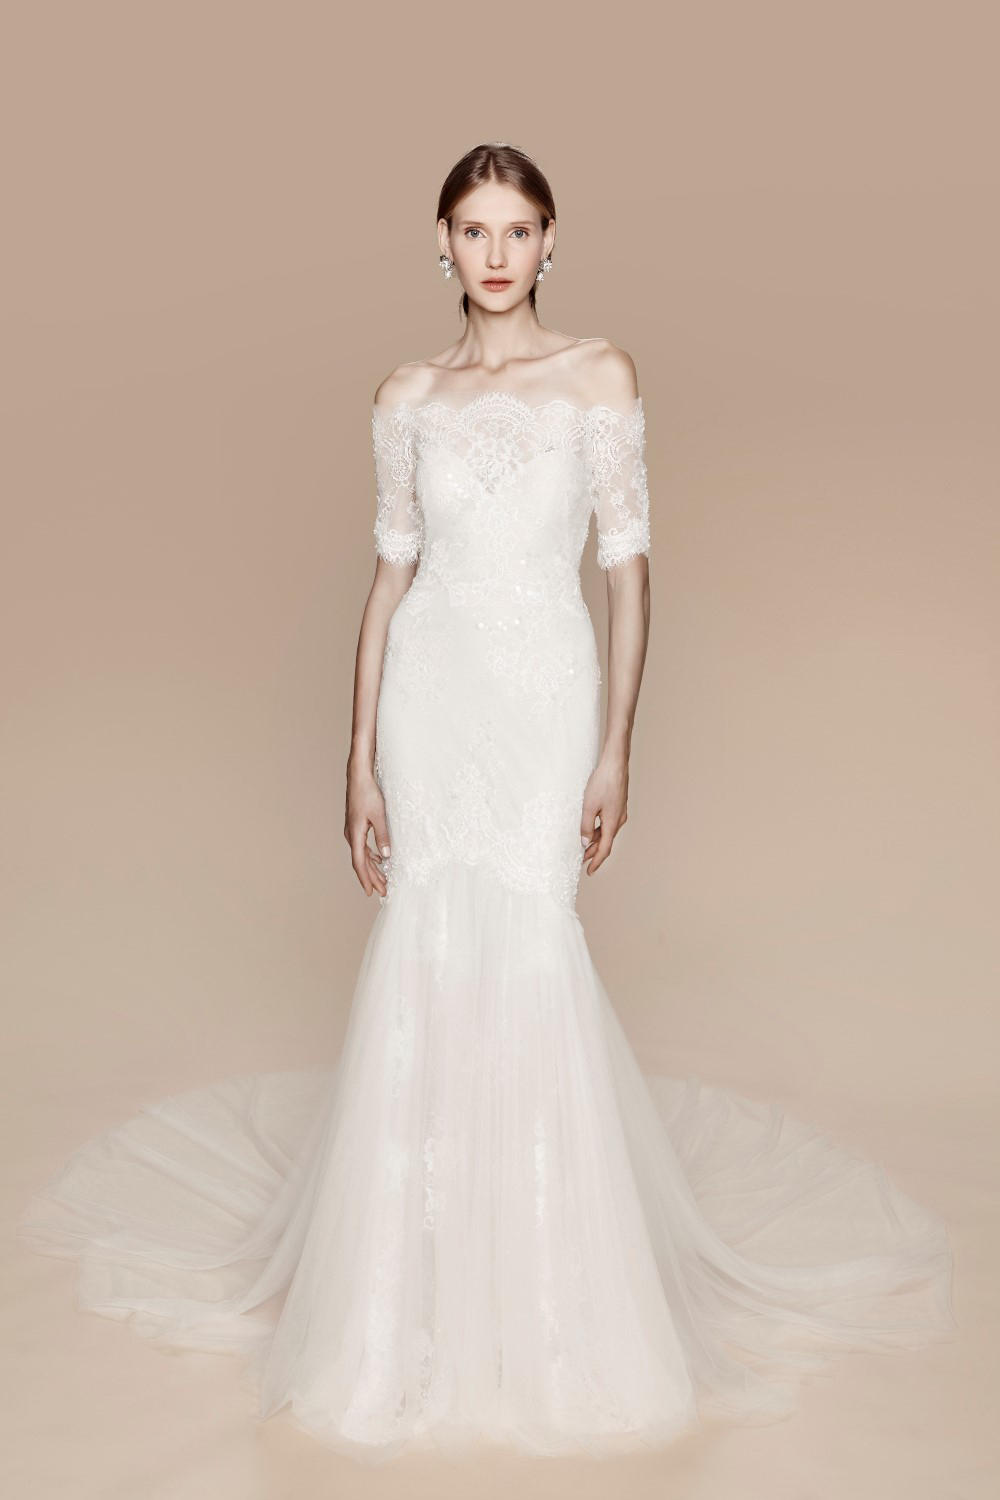 Marchesa Notte Fall 2017 Bridal Collection. www.theweddingnotebook.com